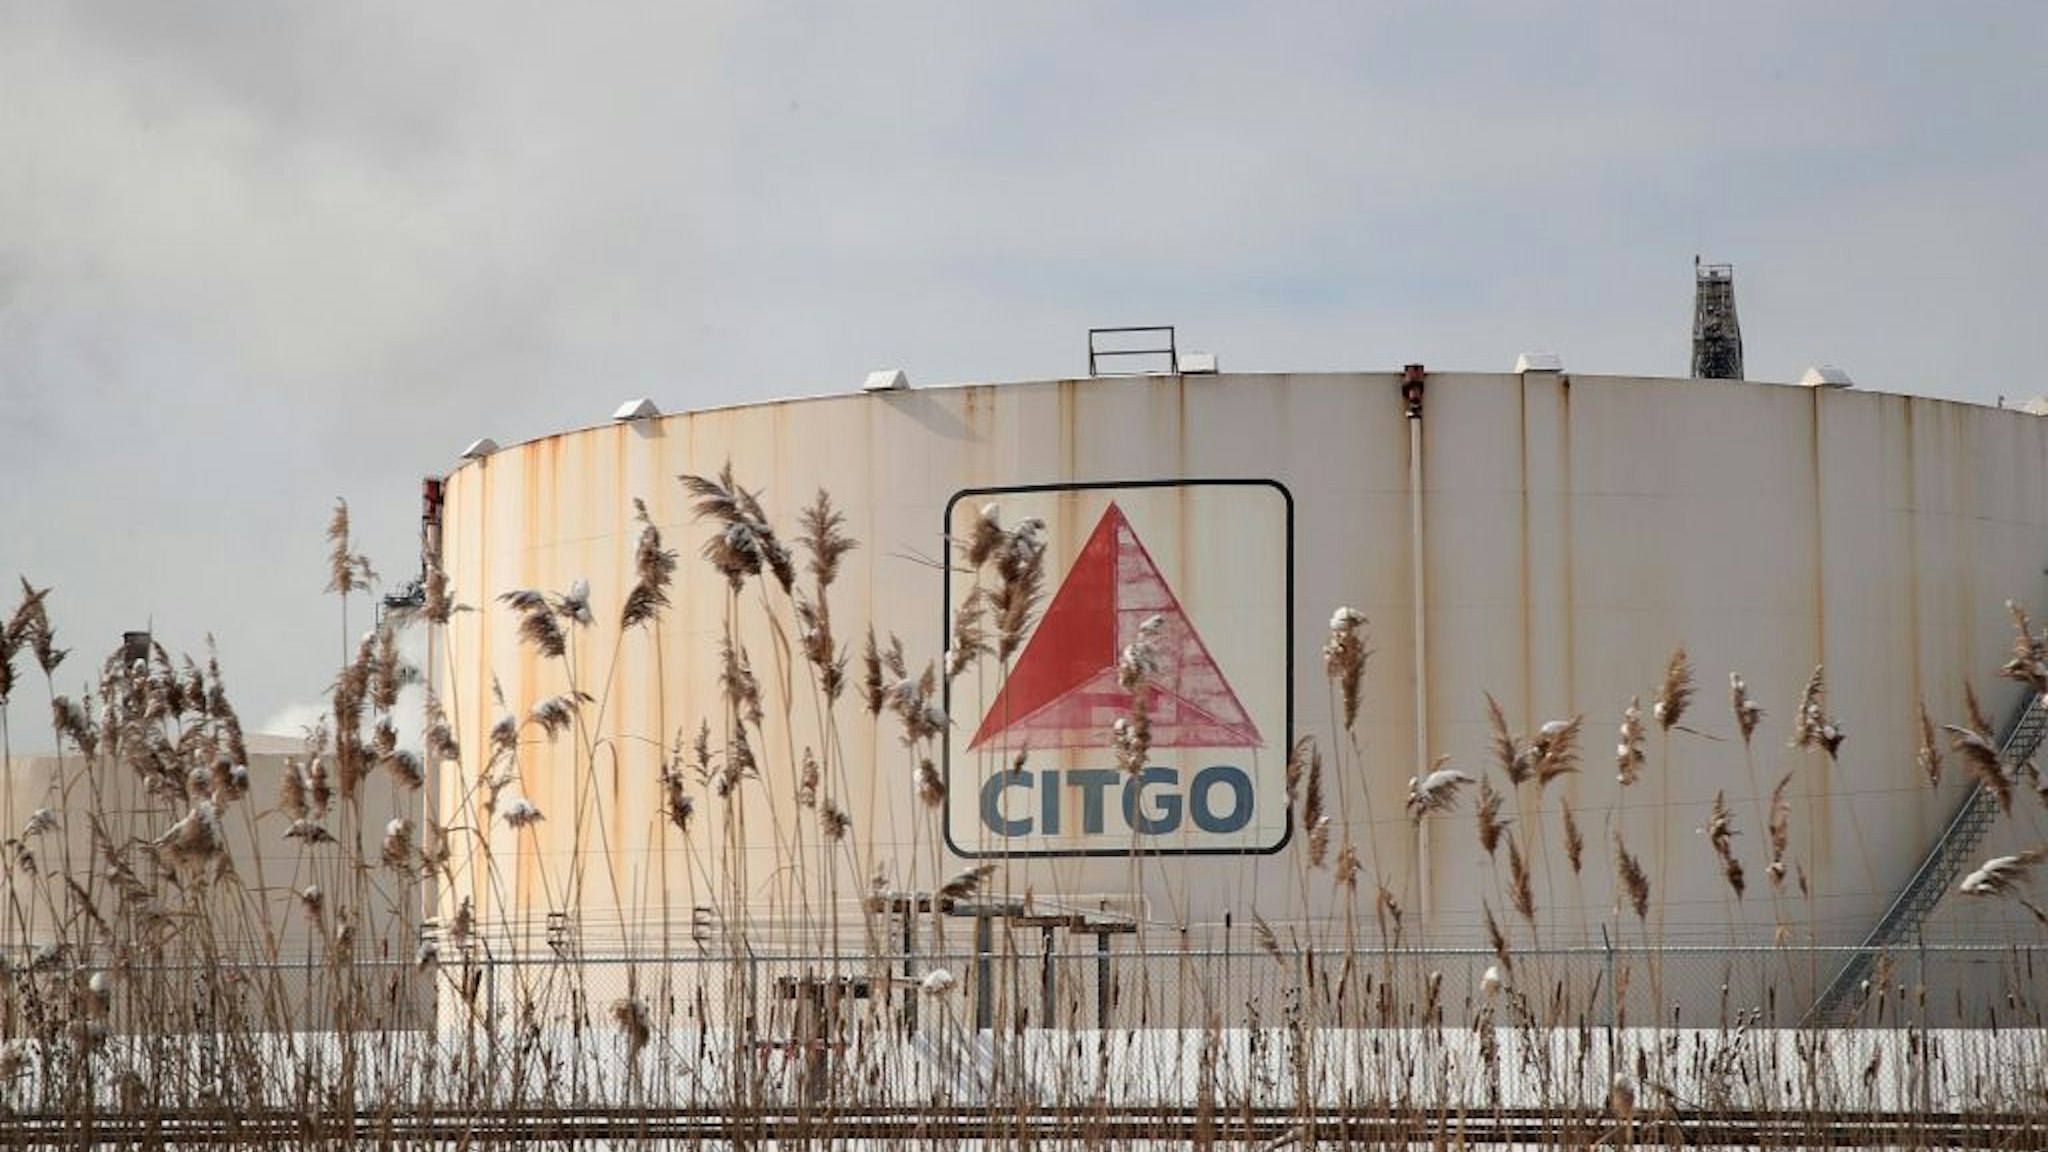 LEMONT, ILLINOIS - FEBRUARY 01: A tank battery is seen at a refinery owned by Citgo, a subsidiary of PDVSA, the Venezuelan state owned oil company, on February 01, 2019 in Lemont, Illinois. In an attempt to force Venezuelan President Nicolás Maduro from office, the Trump administration said recently that it would block all U.S. revenue from Citgo to PDVSA.